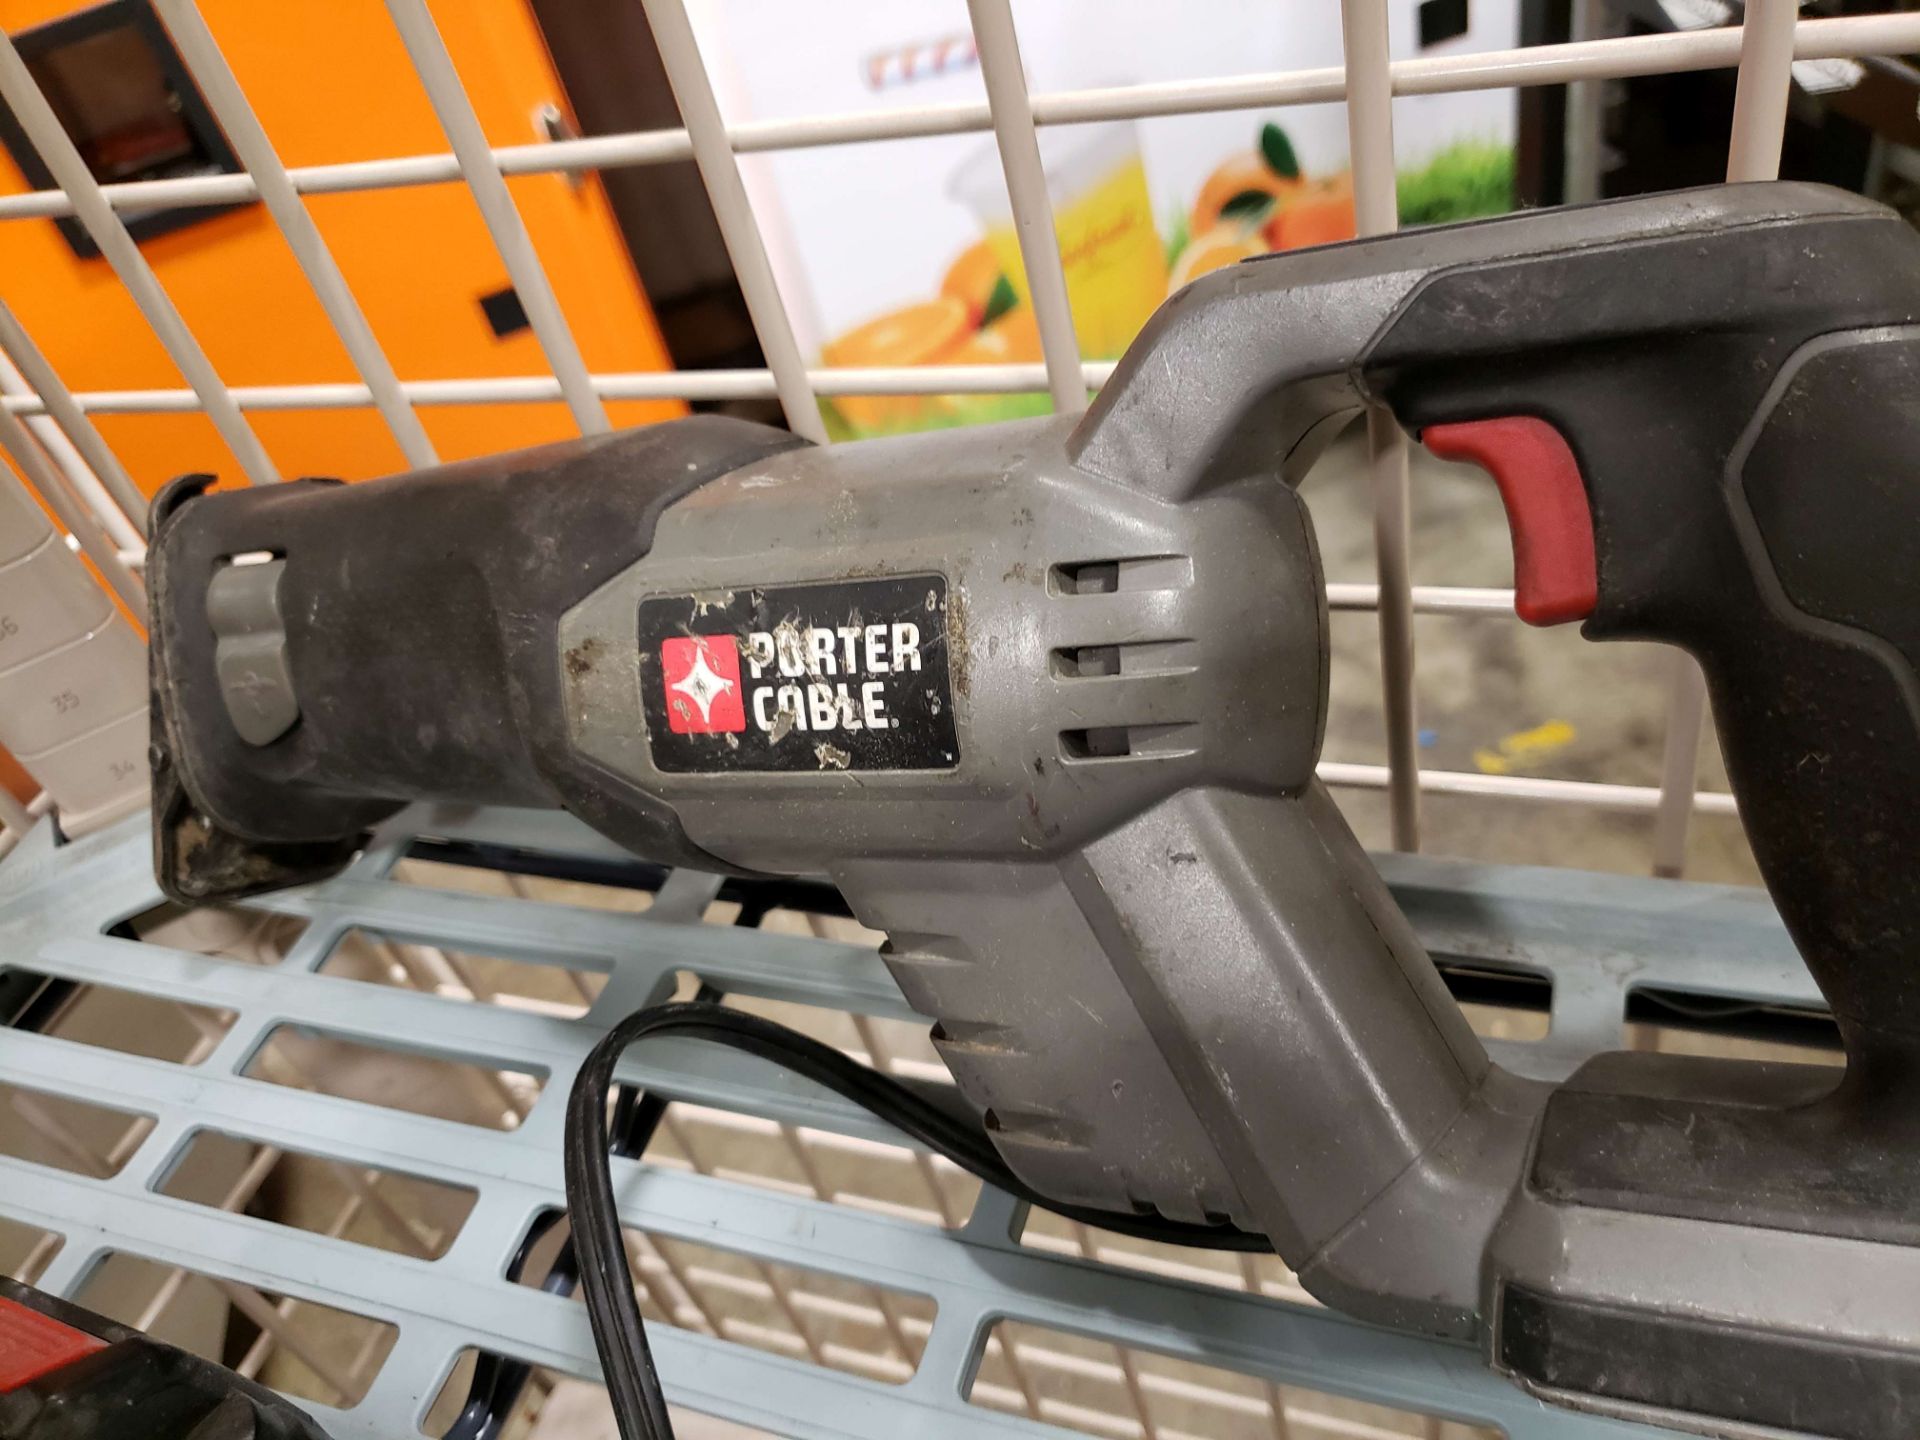 Porter Cable Wireless Power Tools - Image 3 of 6